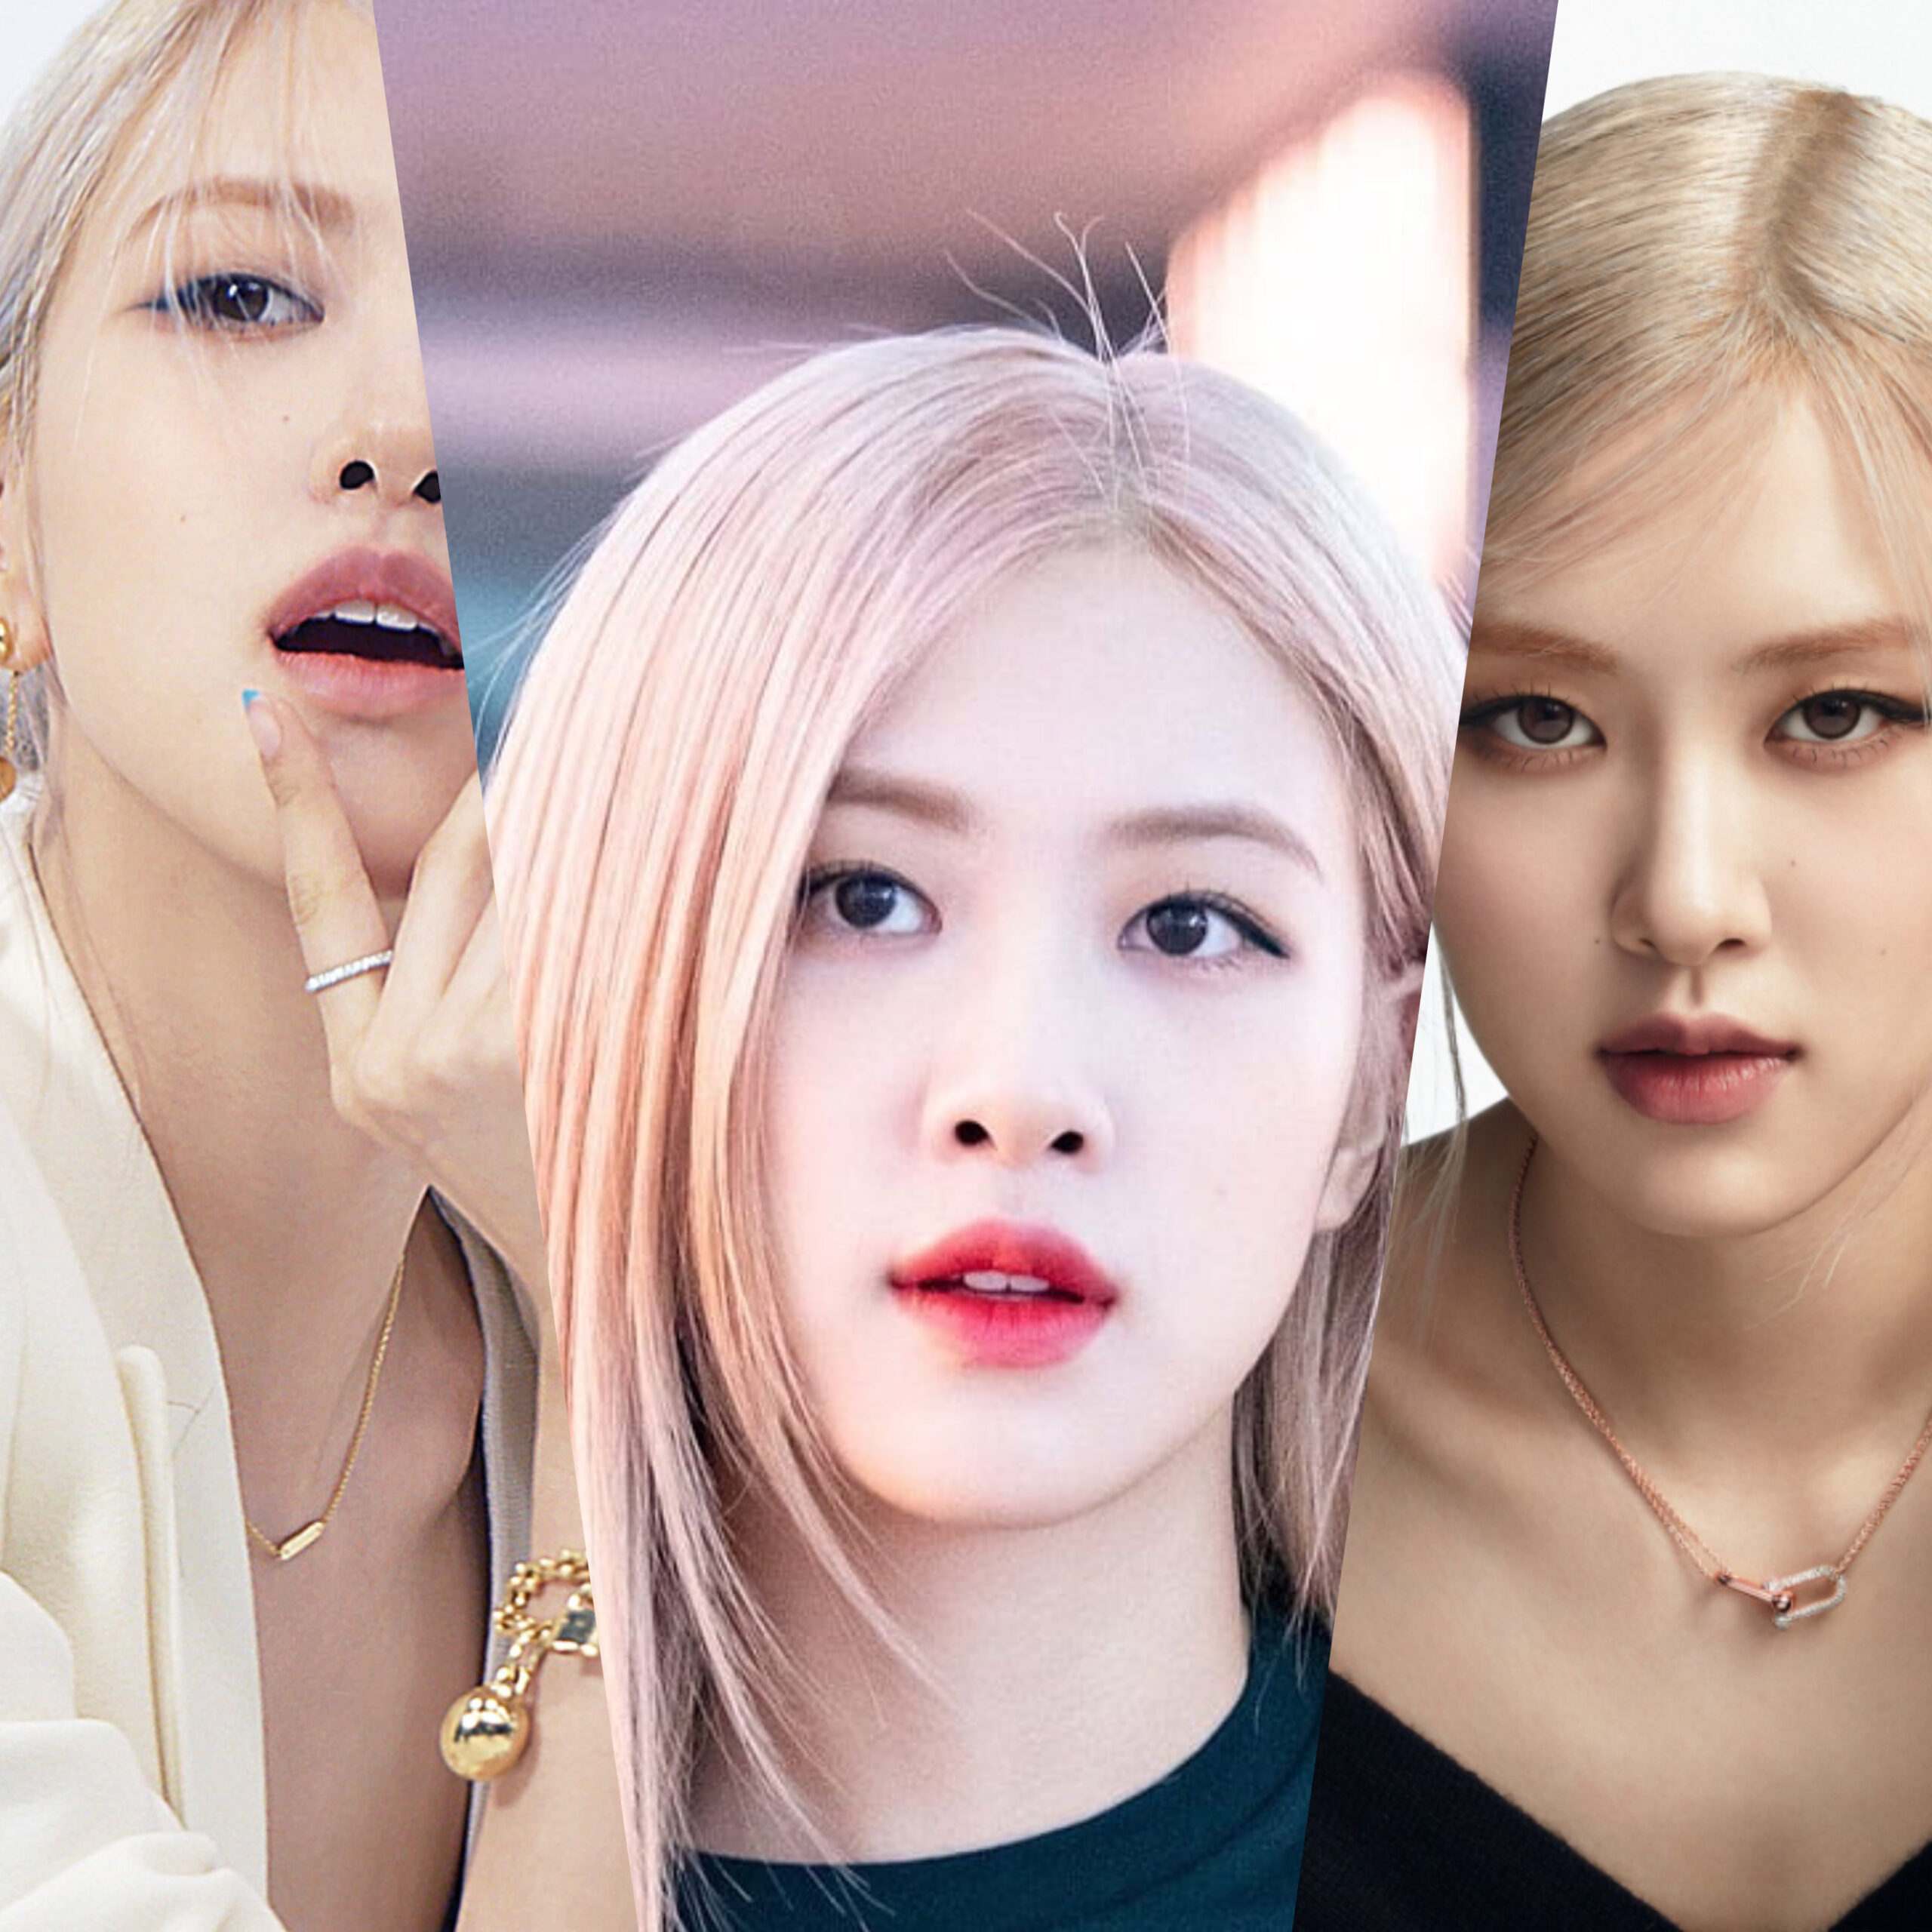 blackpink ROSE Achieves Record-breaking Brand Engagement Valued at Over $550 Million in the Last Two Years